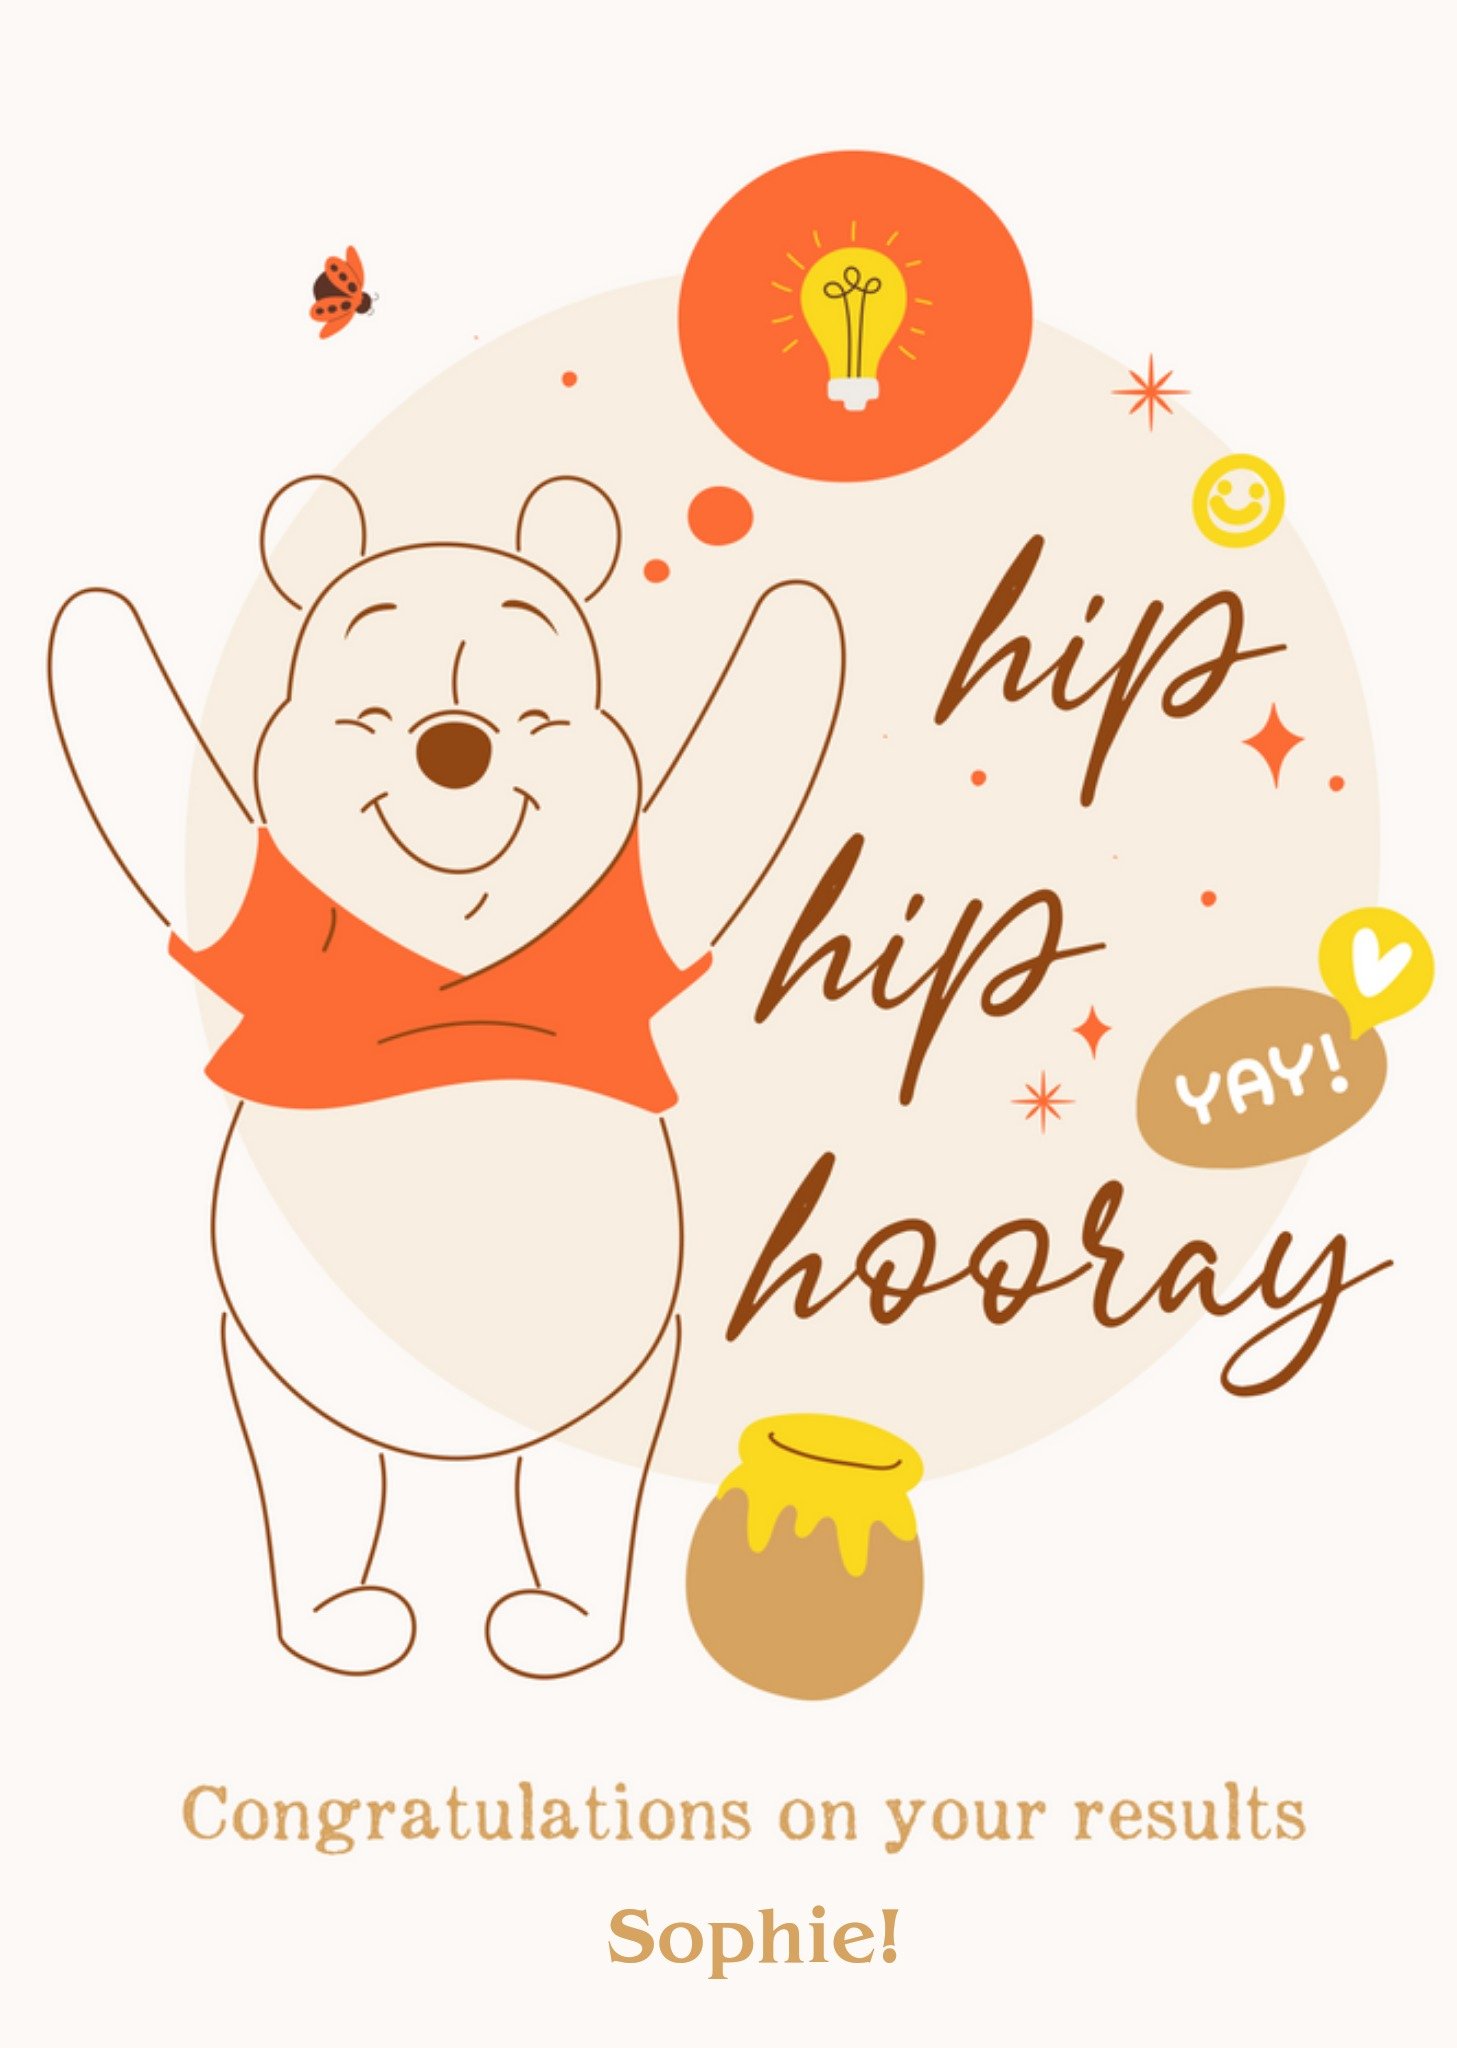 Winnie The Pooh Hip Hip Hooray Congratulations On Your Results Card Ecard